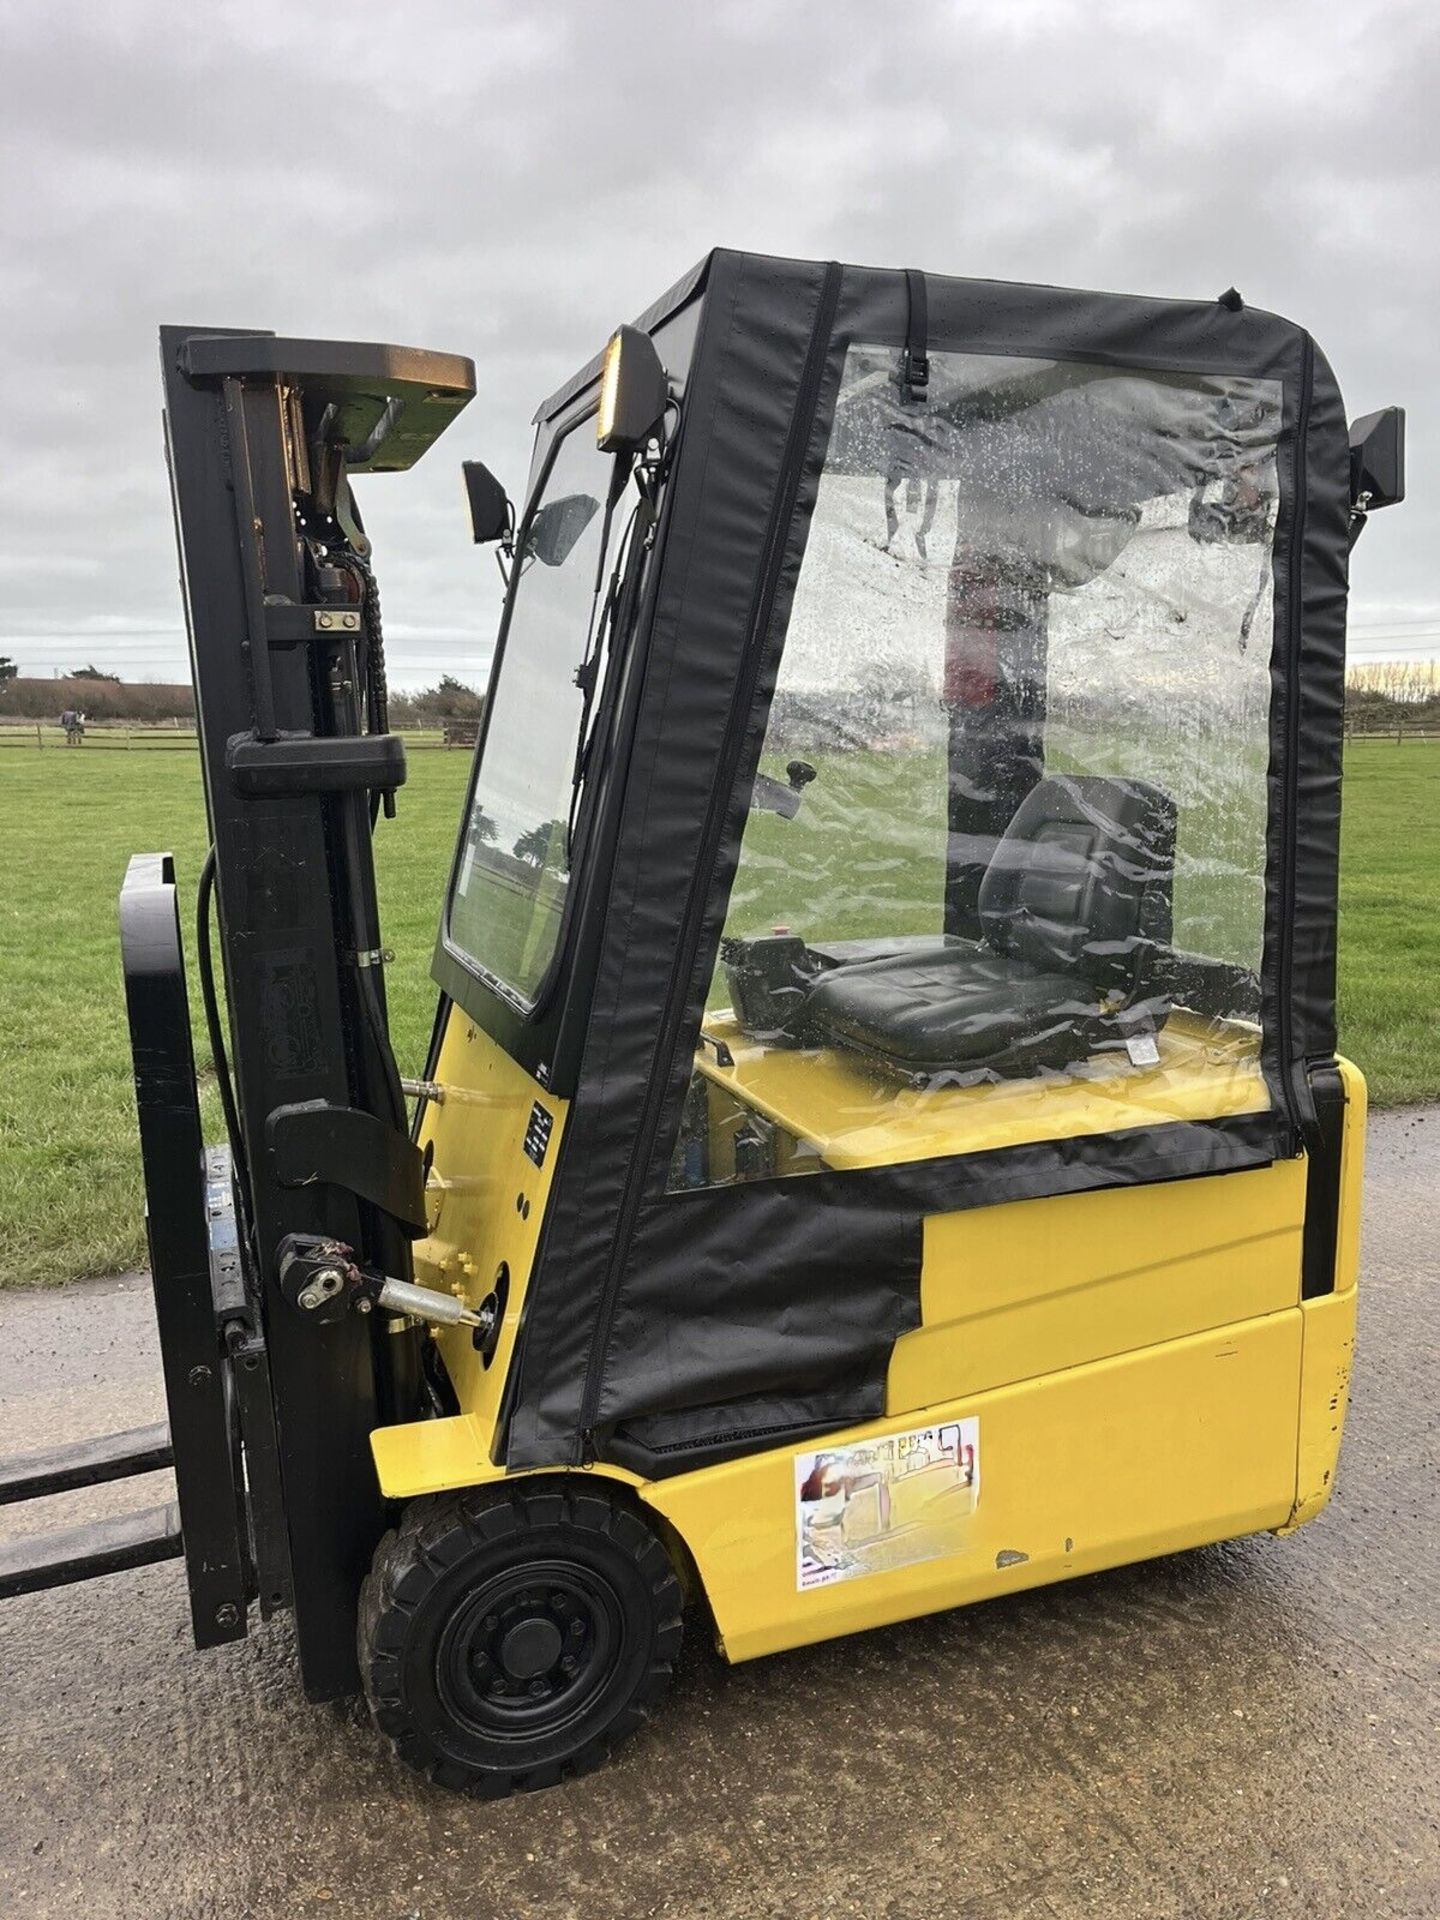 CATERPILLAR 1.6 Electric Forklift Truck (Container Spec) - Image 9 of 9